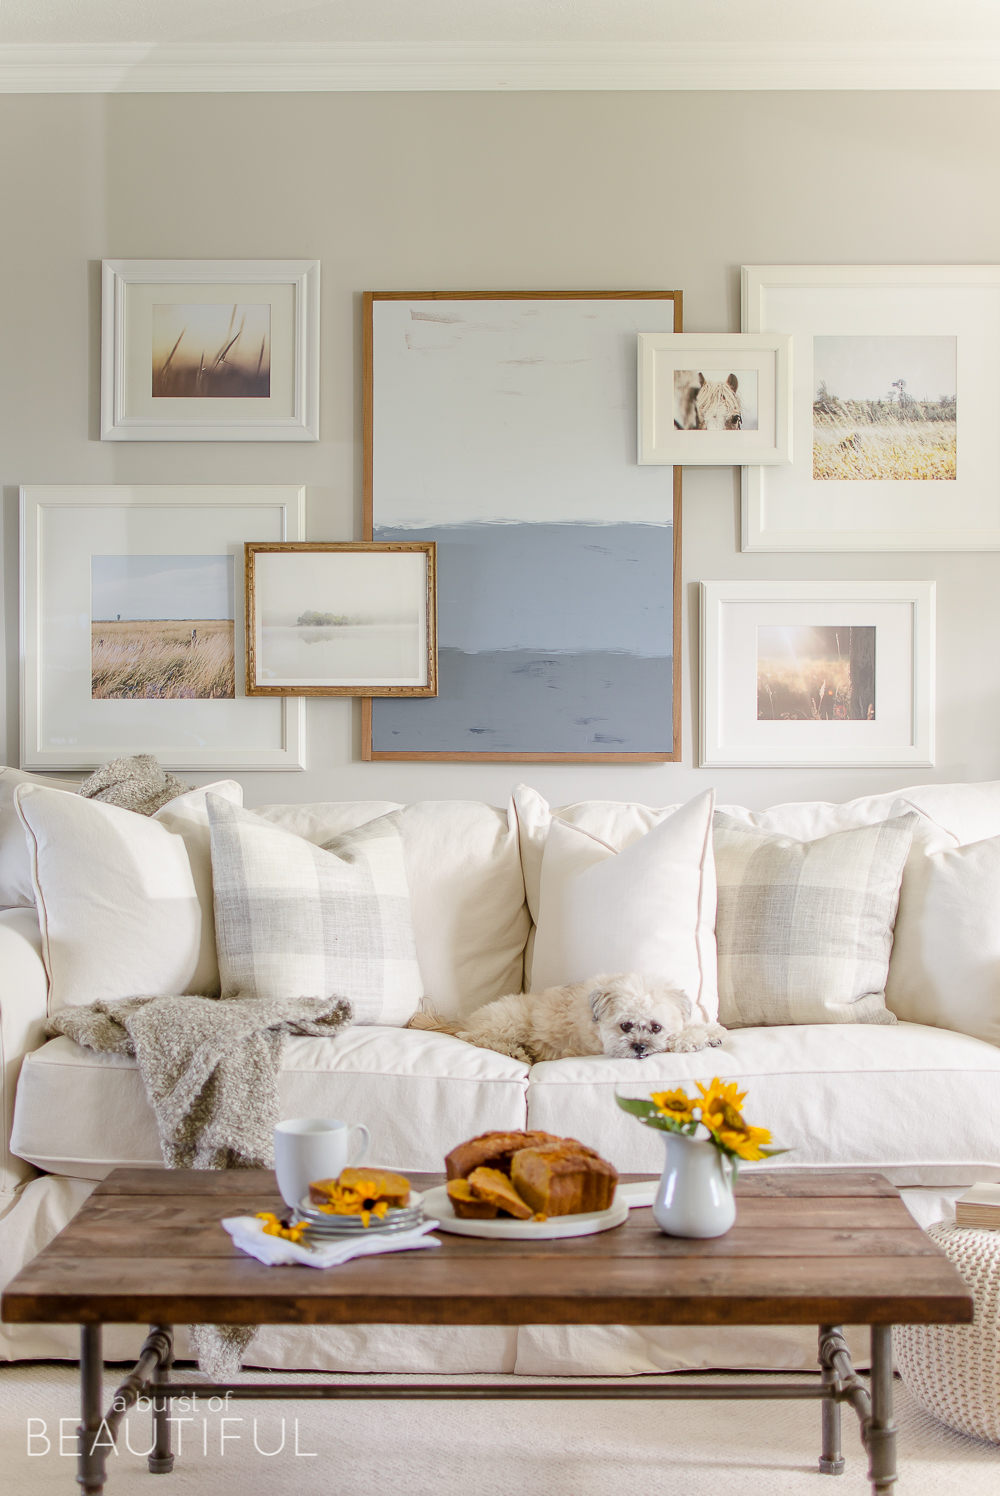 Eclectic Home Tour - A Burst of Beautiful - I love the layered gallery wall and her neutral farmhouse style